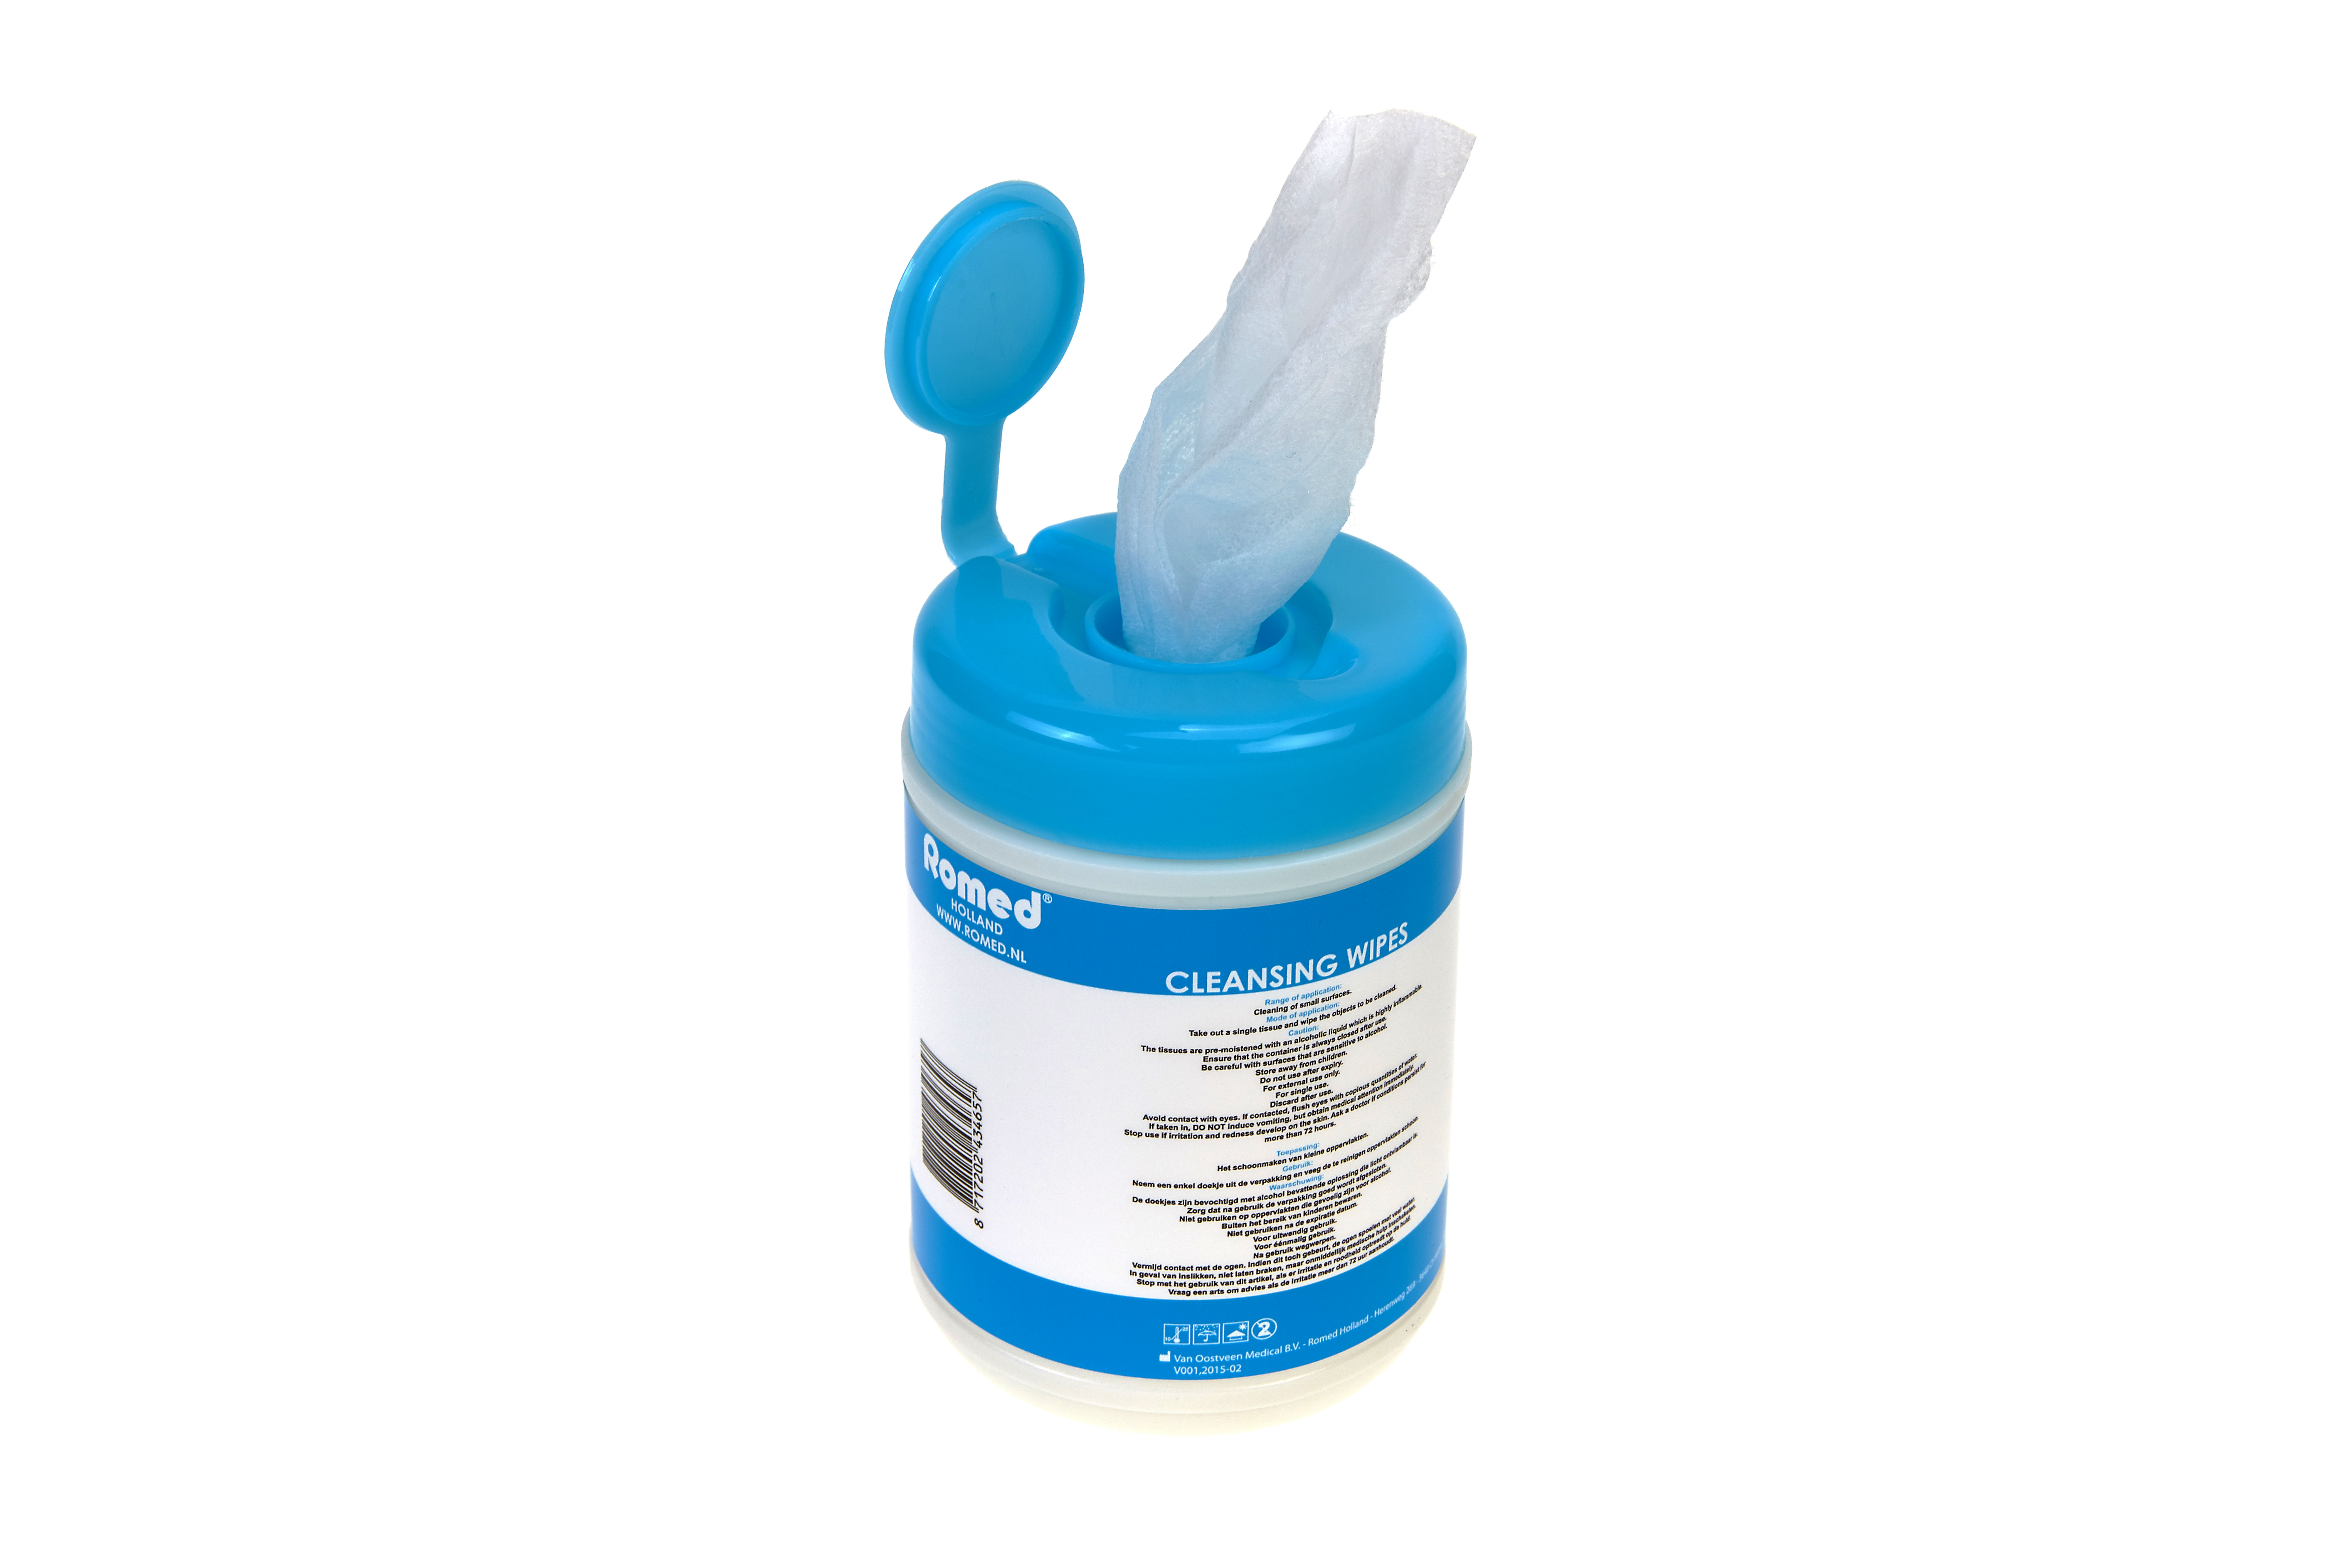 ABW Romed cleansing wipes, 20x11cm, 80% ethanol, 5% isopropanol and water, per 110 wipes in a dispenser, 6 dispensers in inner box, 6 x 6 dispensers = 36 dispensers in a carton.